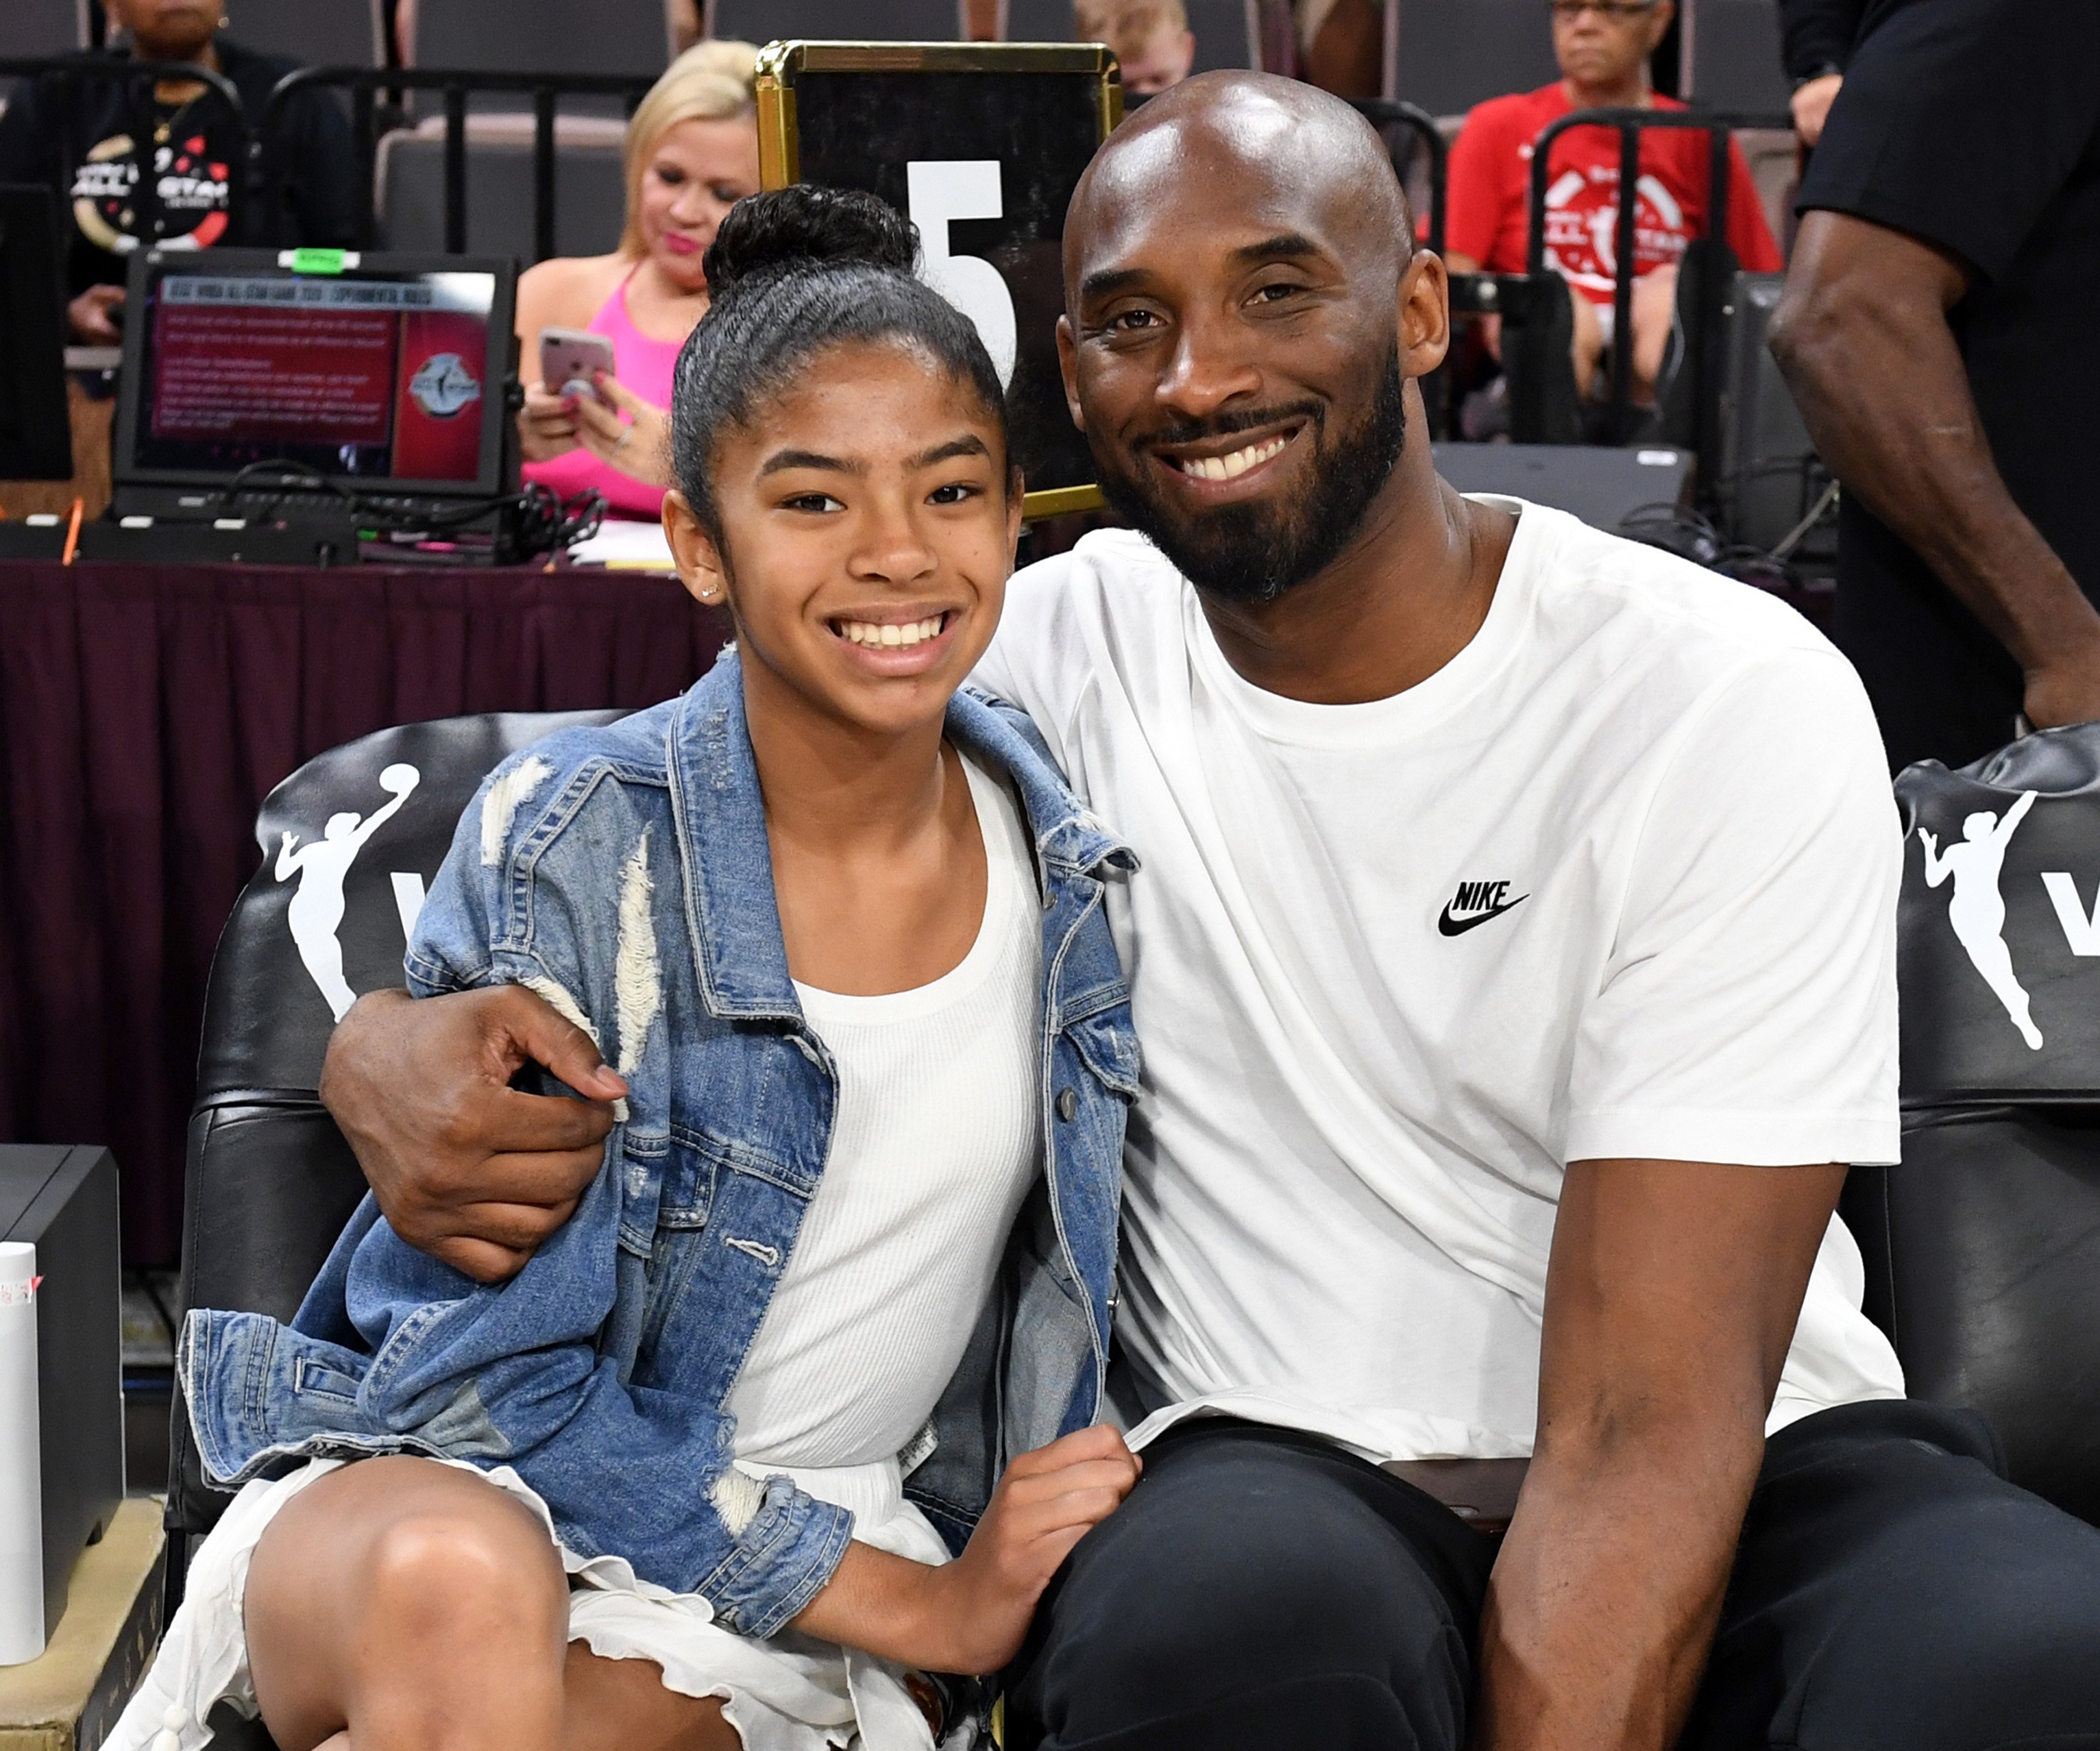  Gianna Bryant and her father, former NBA player Kobe Bryant, attend the WNBA All-Star Game on July 27, 2019, in Las Vegas, Nevada. | Source: Getty Images.